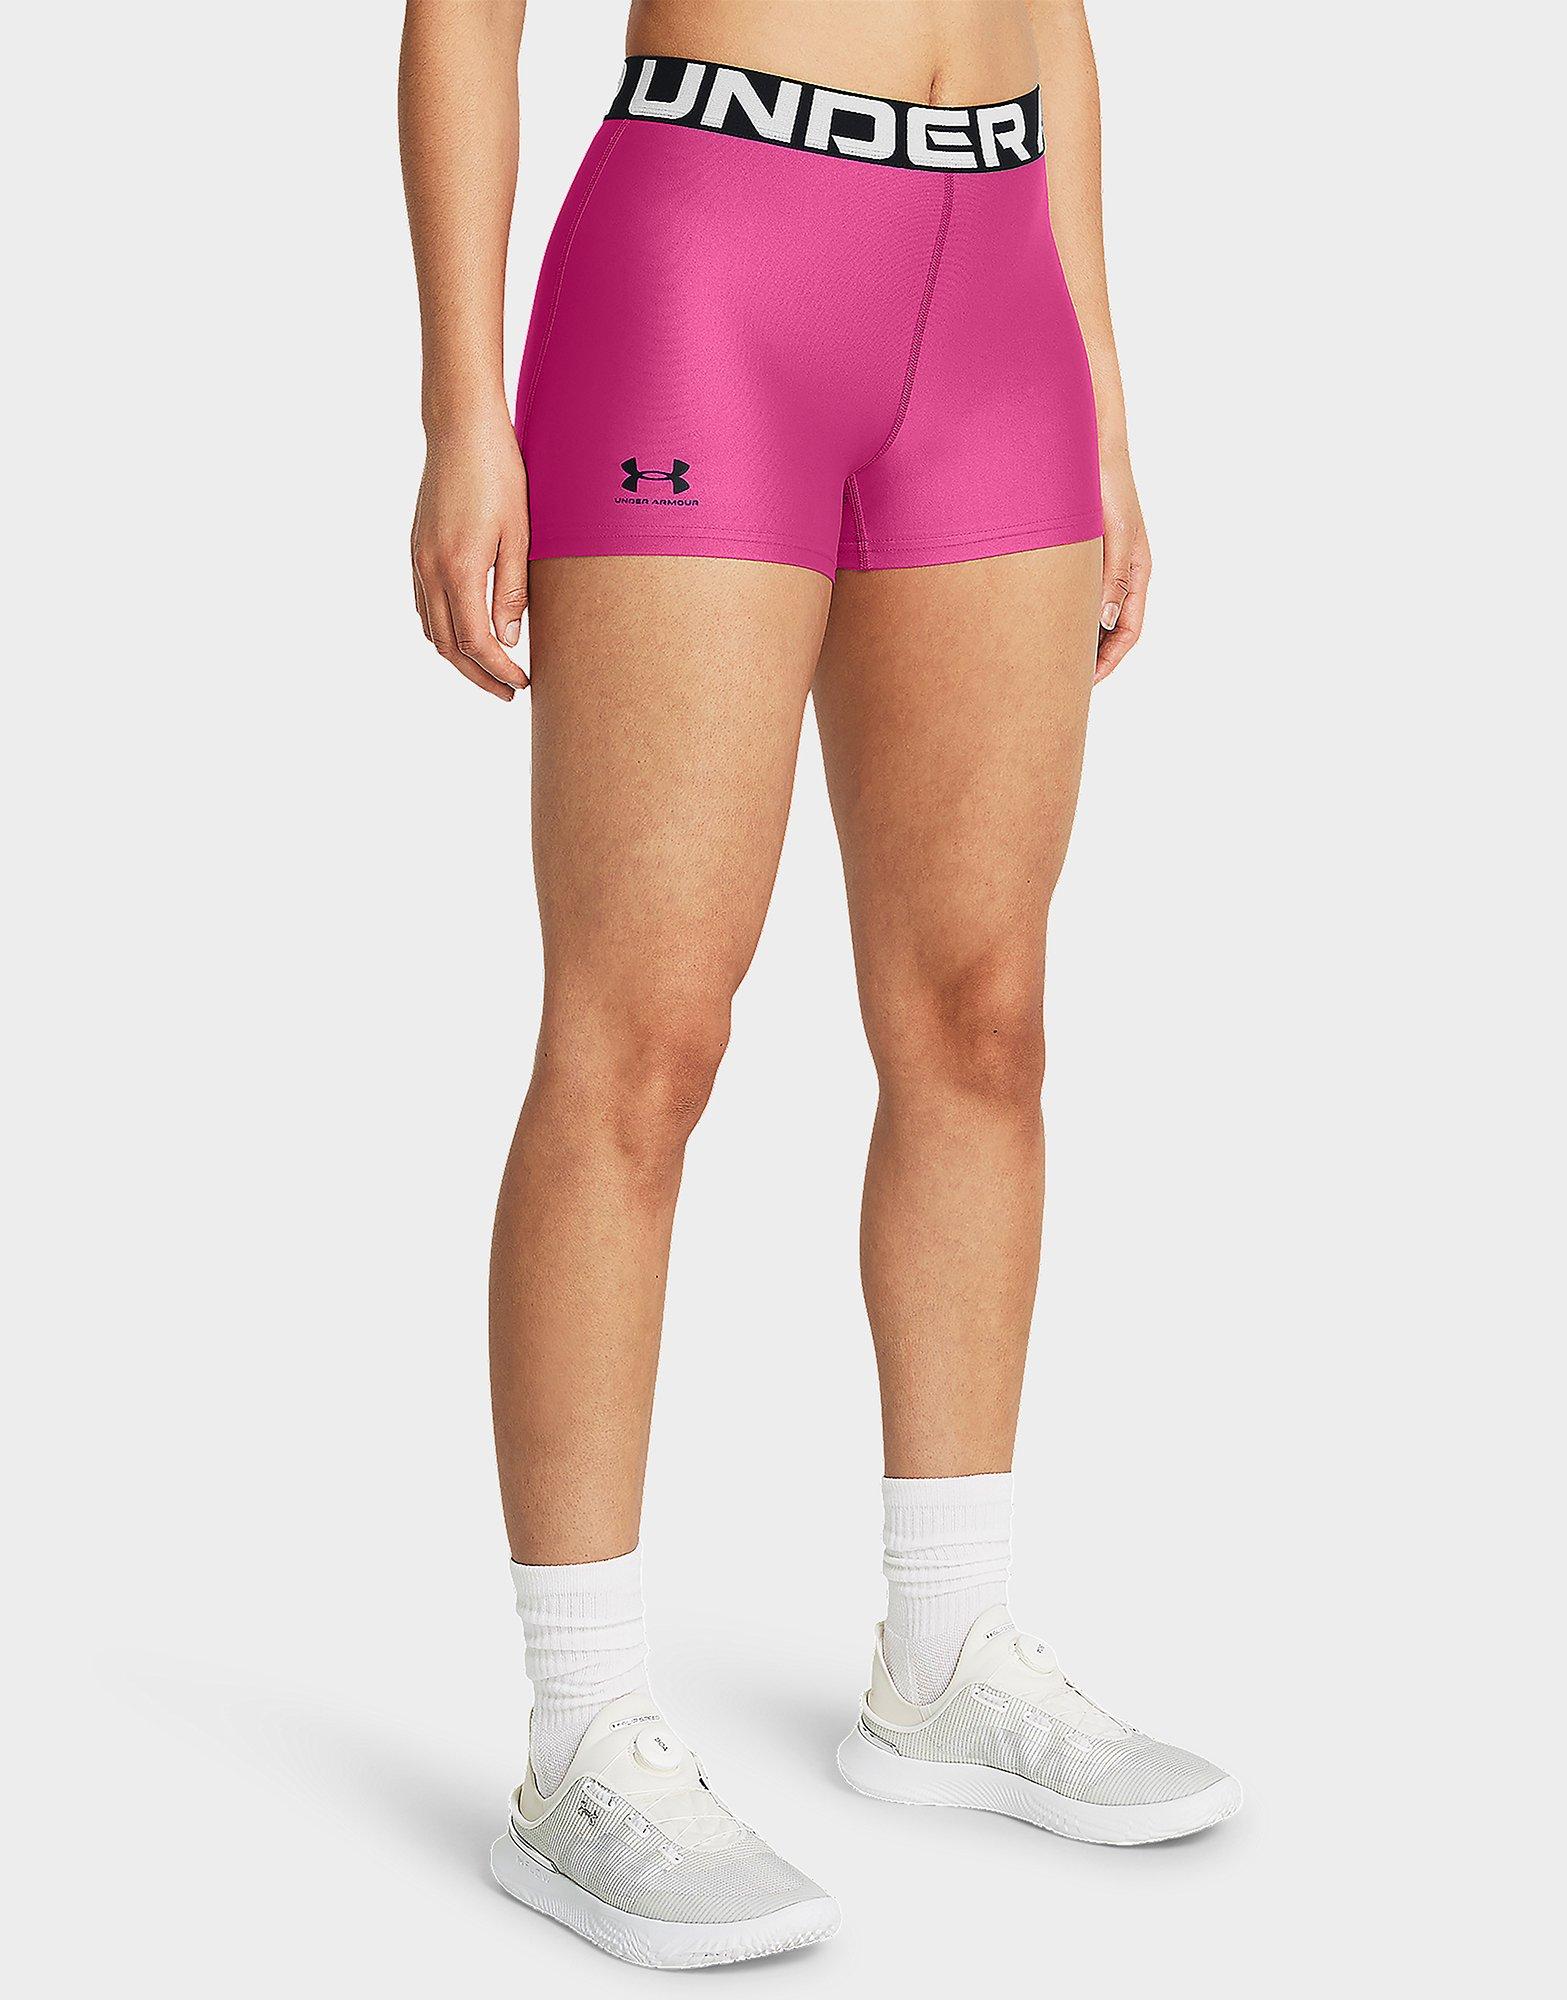 NWT Neon Pink Under Armour Spandex Shorts